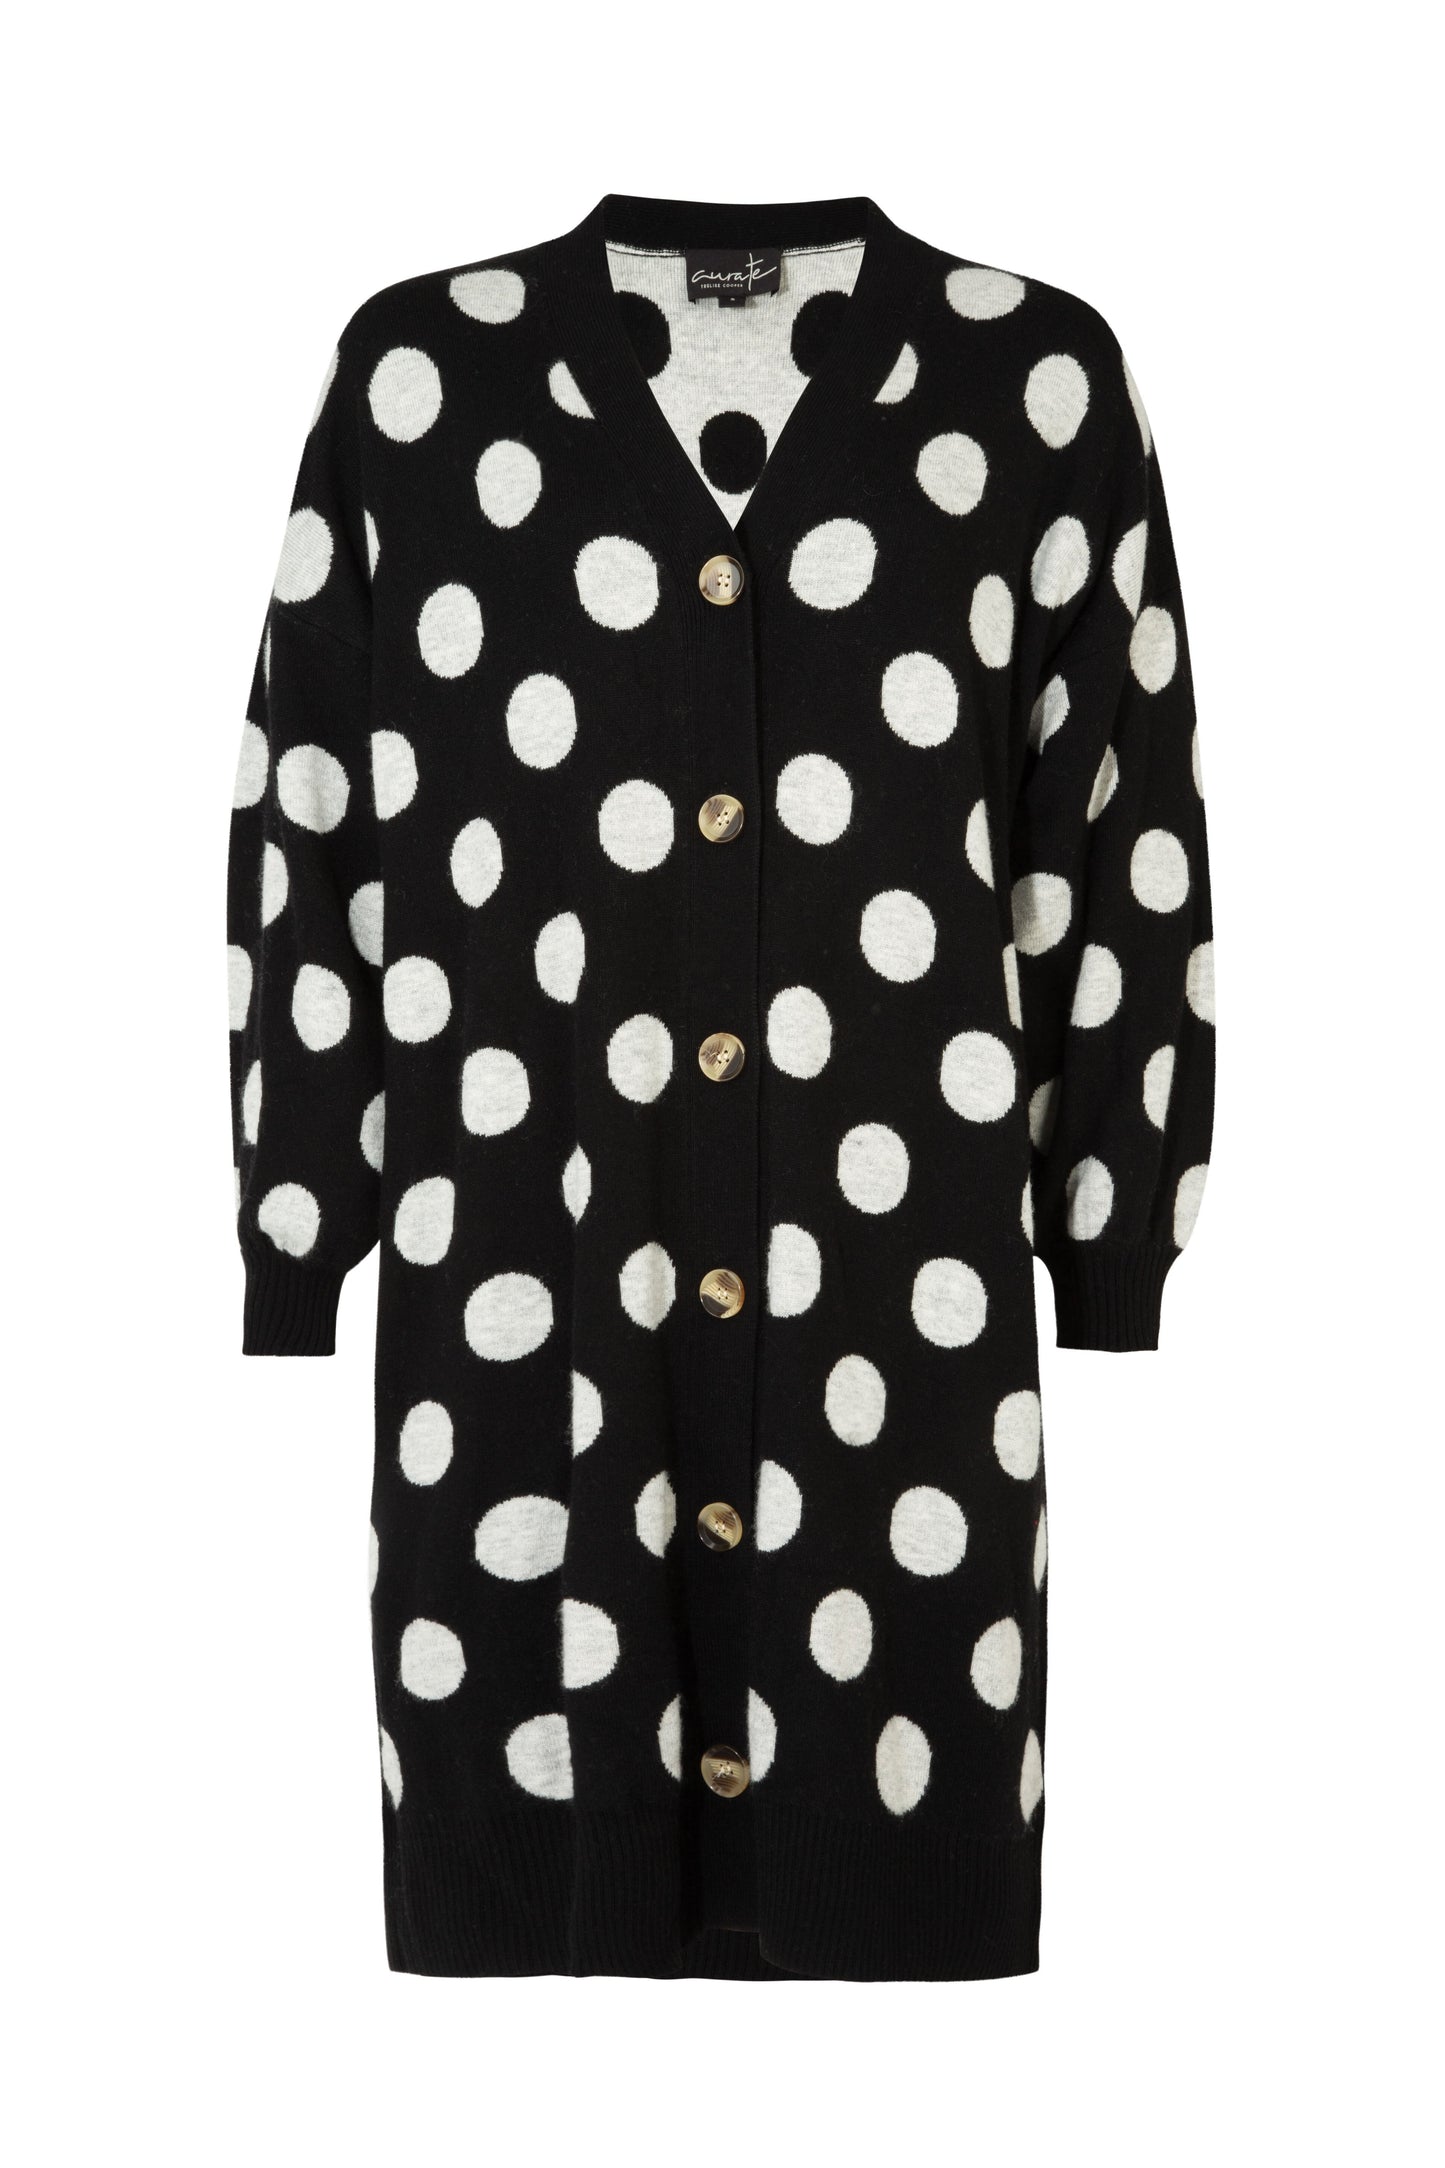 CURATE ONE CHIC CHICK CARDIGAN - BLACK/GREY - THE VOGUE STORE